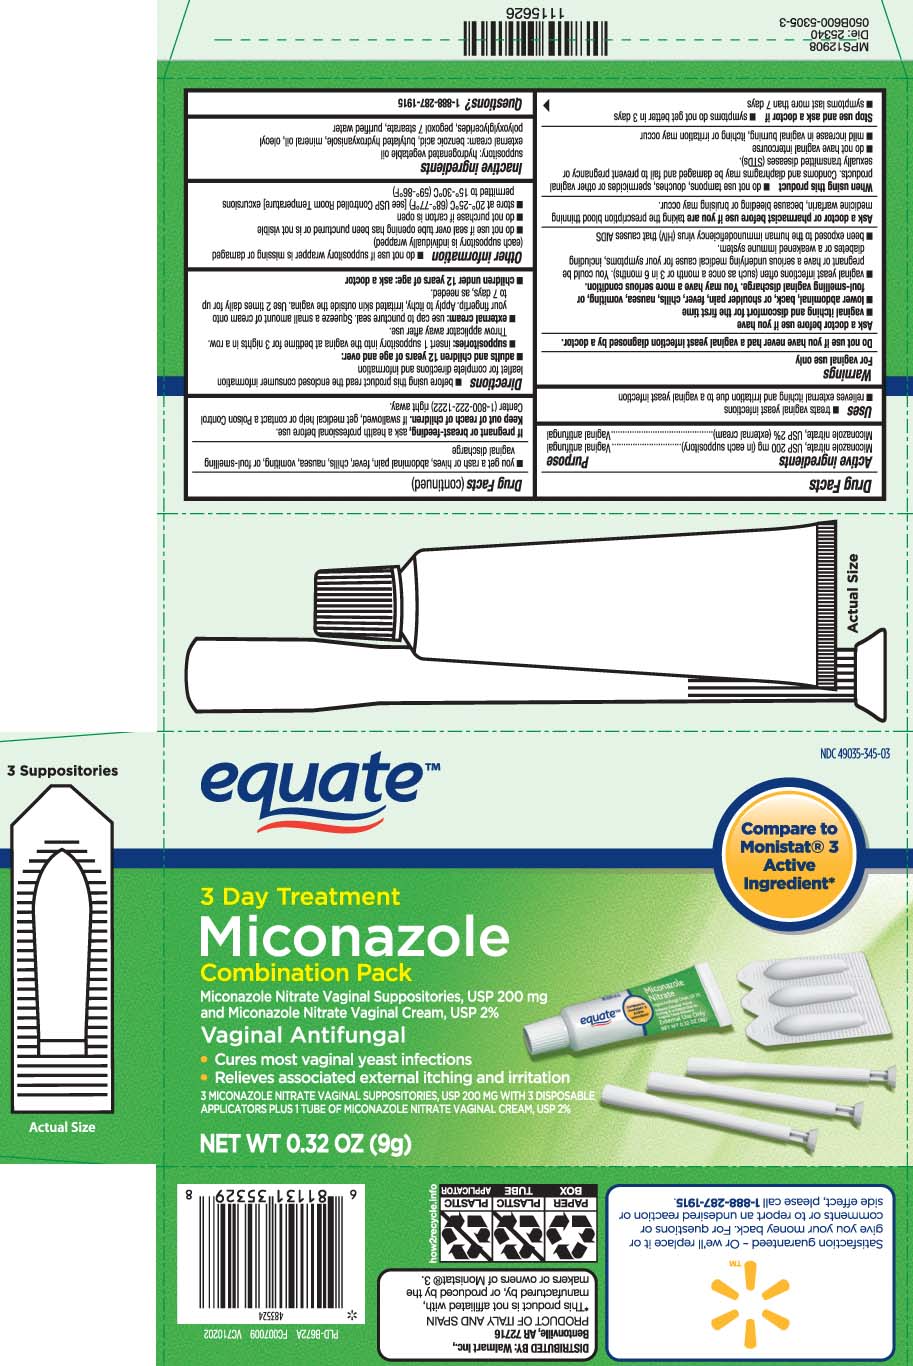 Miconazole Nitrate, USP 200 mg (in each suppository) Miconazole Nitrate, USP 2% (external cream)